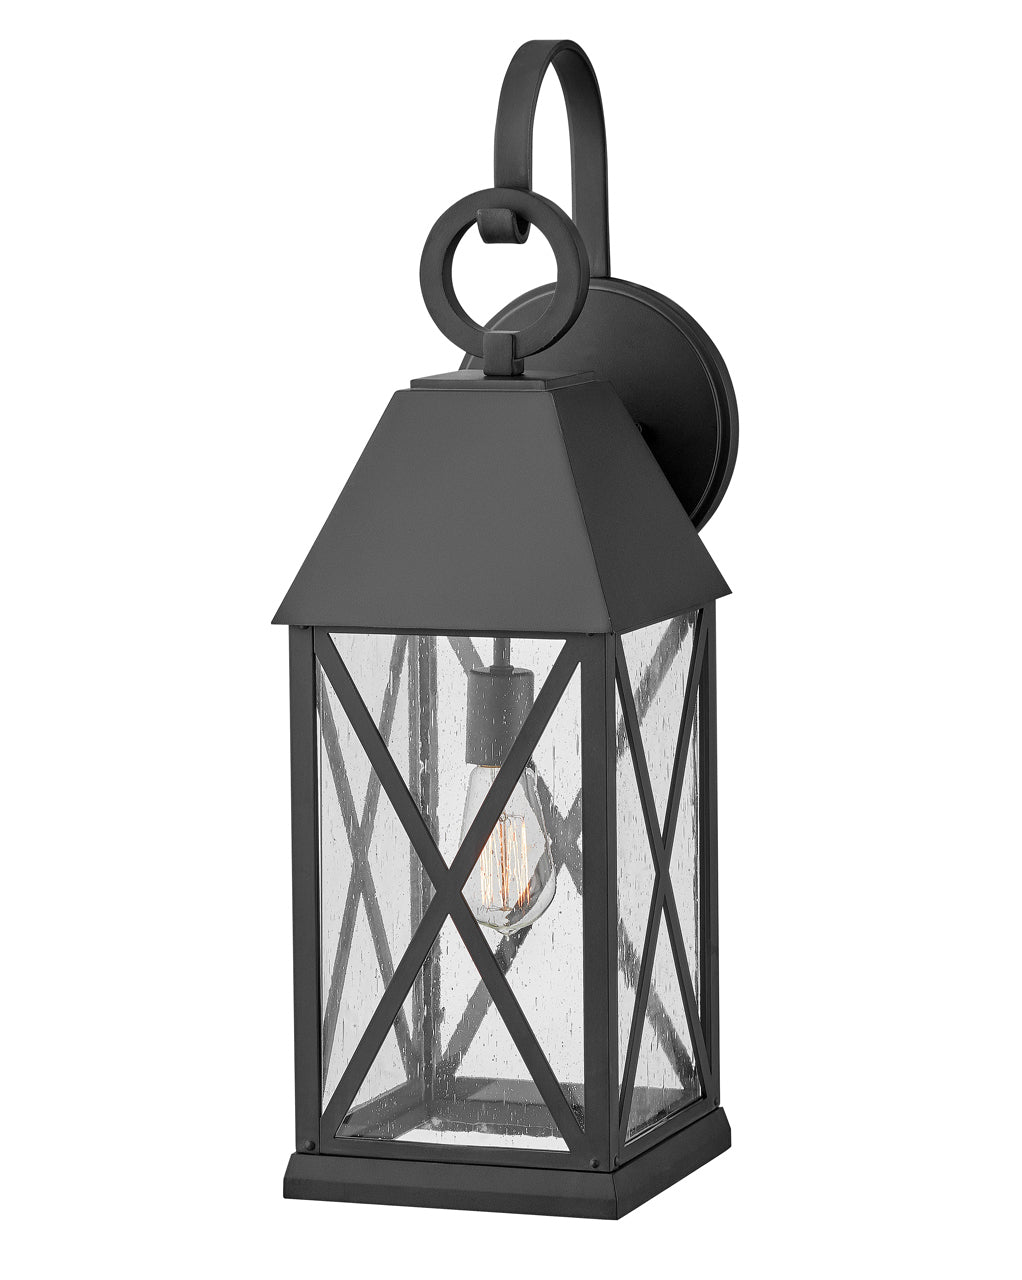 OUTDOOR BRIAR Wall Mount Lantern Outdoor l Wall Hinkley Museum Black 10.0x8.0x25.75 